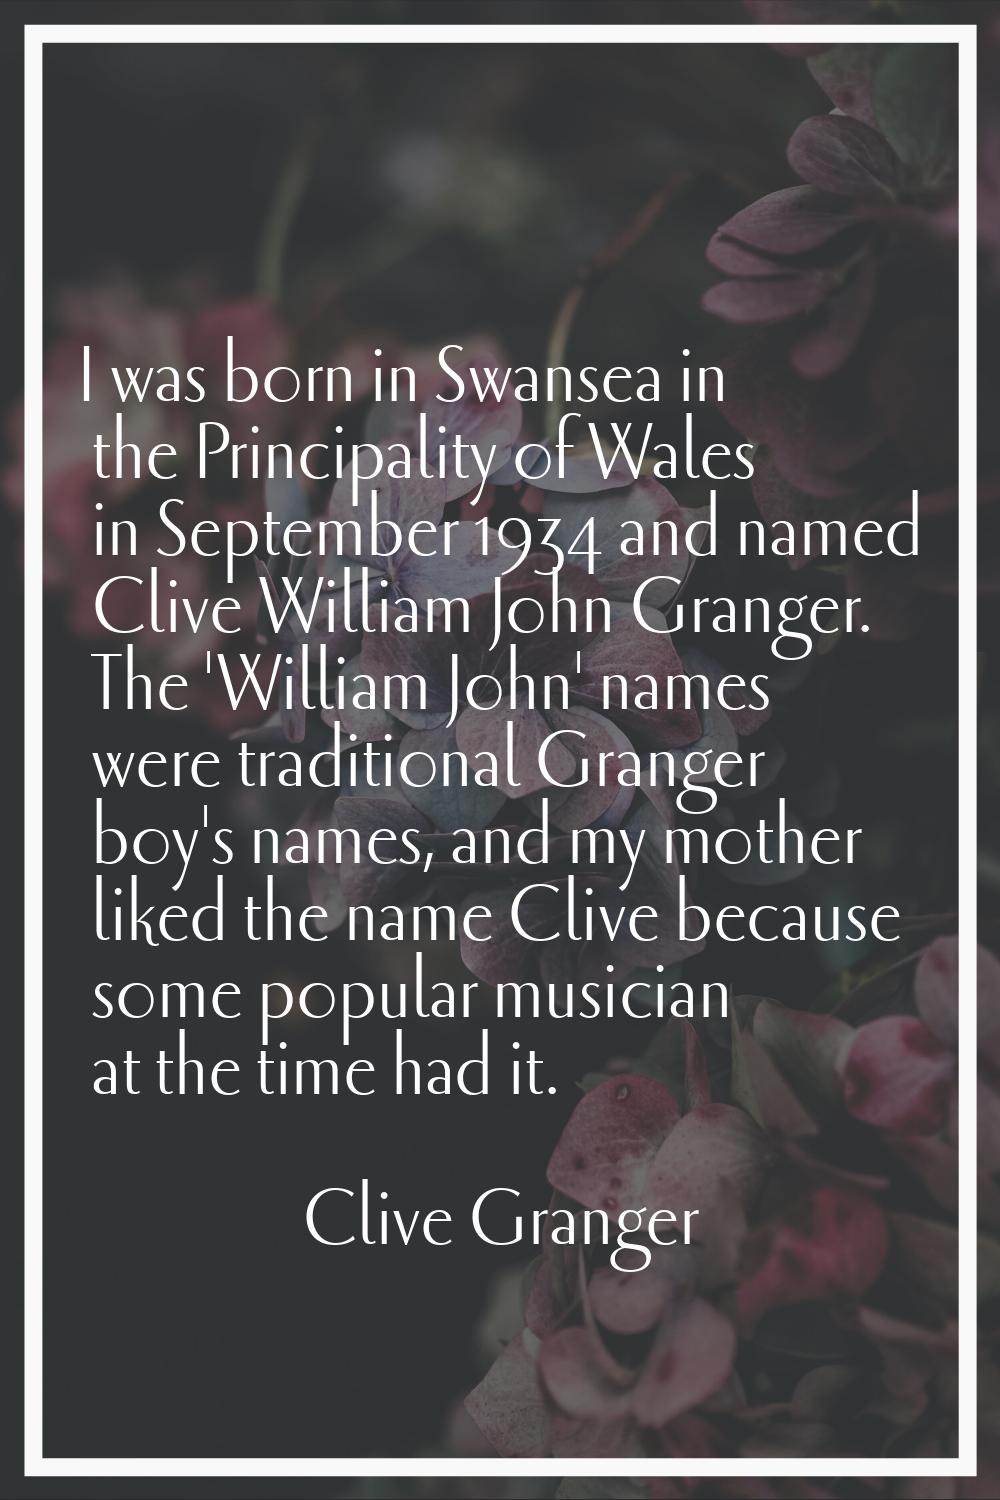 I was born in Swansea in the Principality of Wales in September 1934 and named Clive William John G